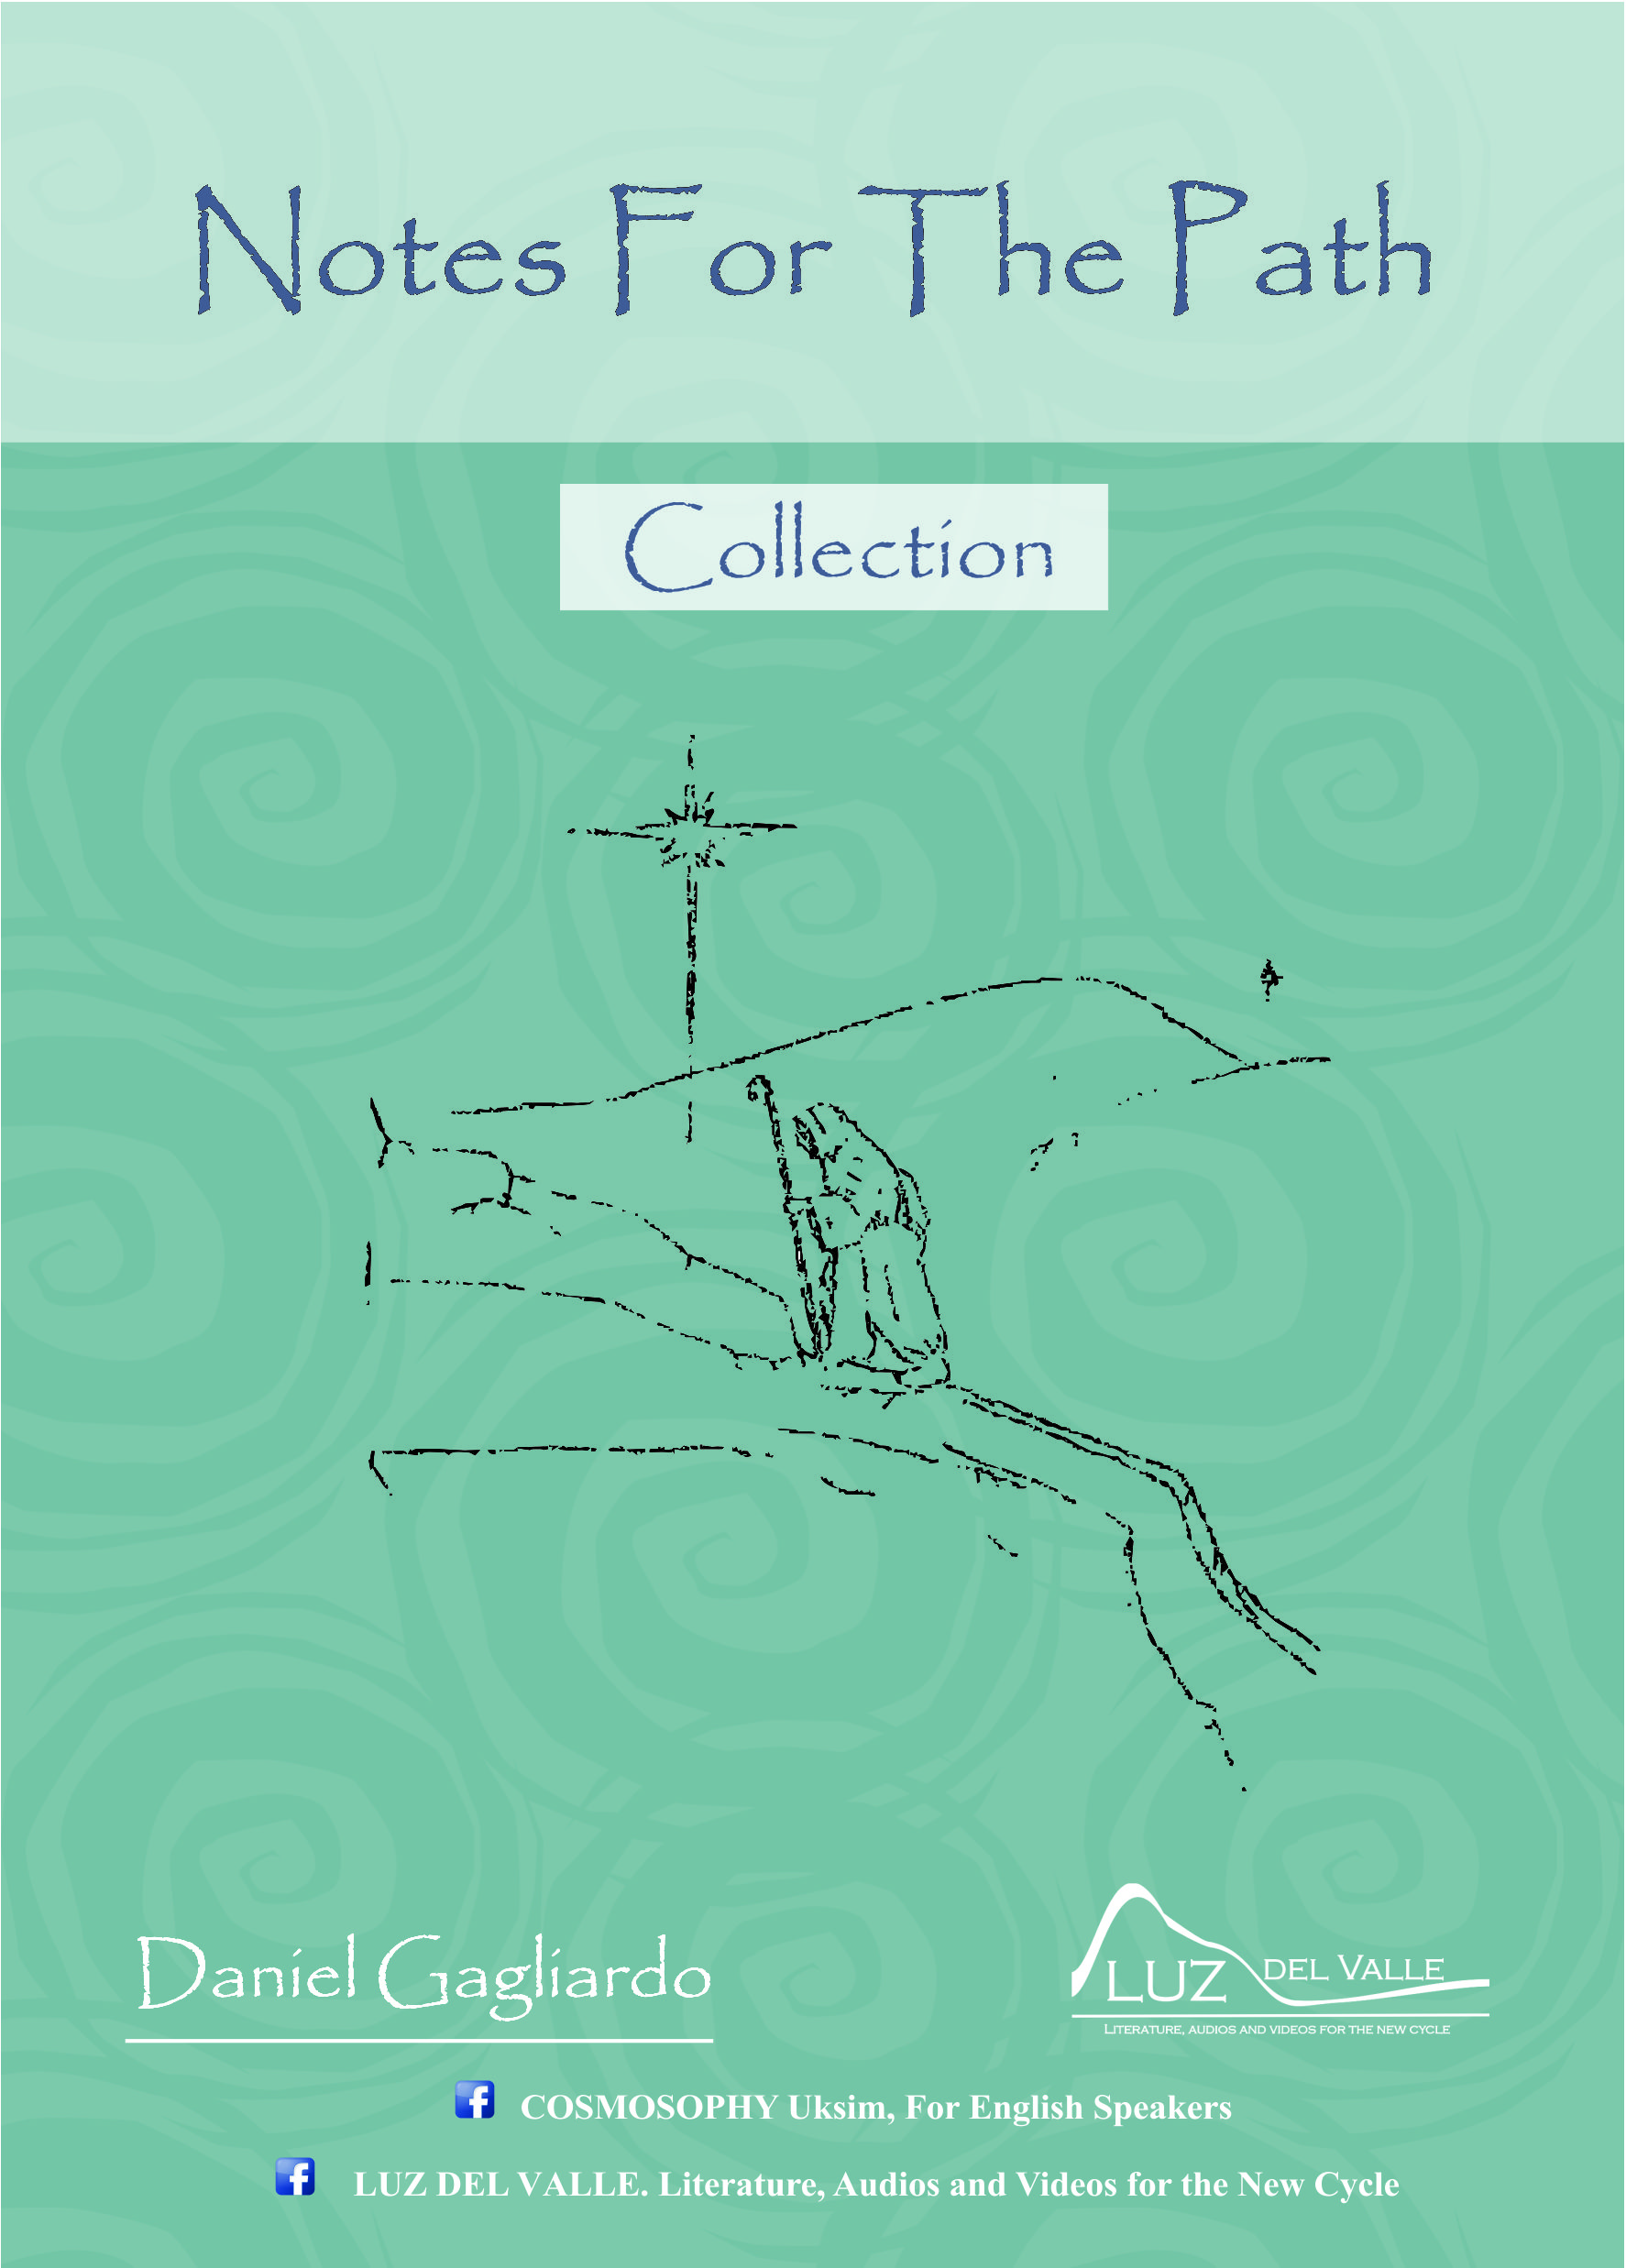 Notes for the path collection